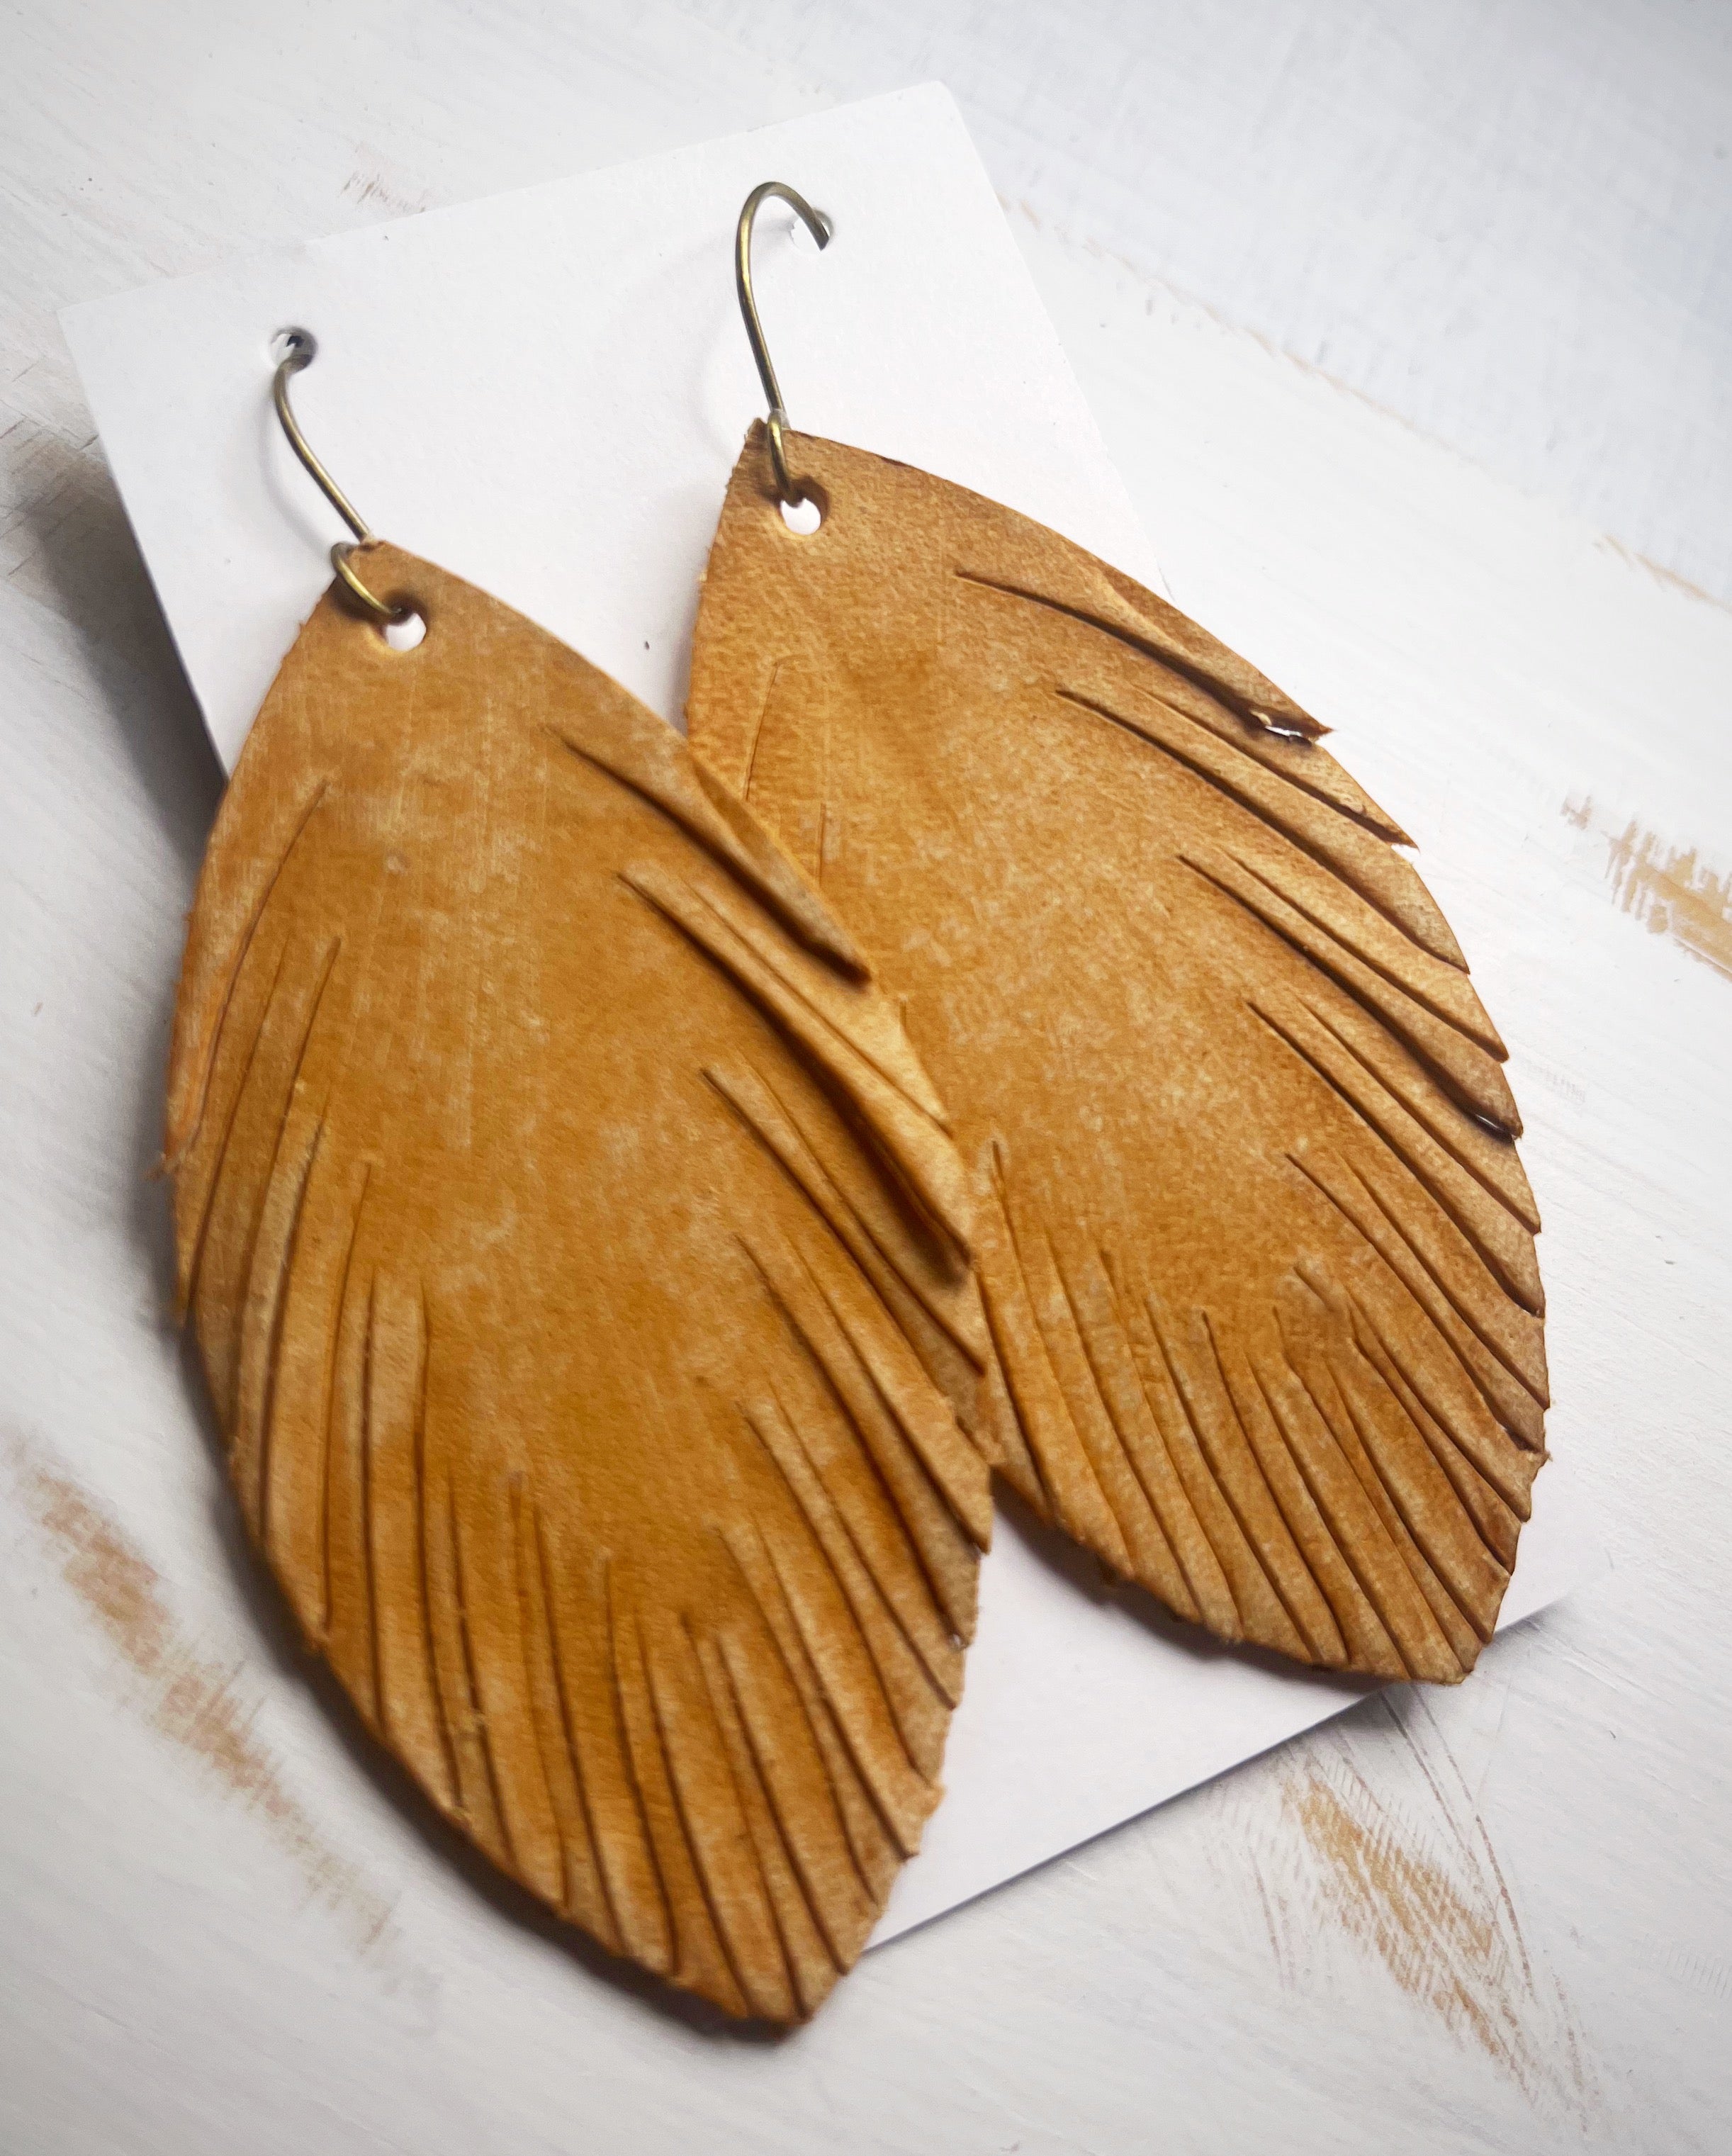 Leather Earrings- Fringed Feathers